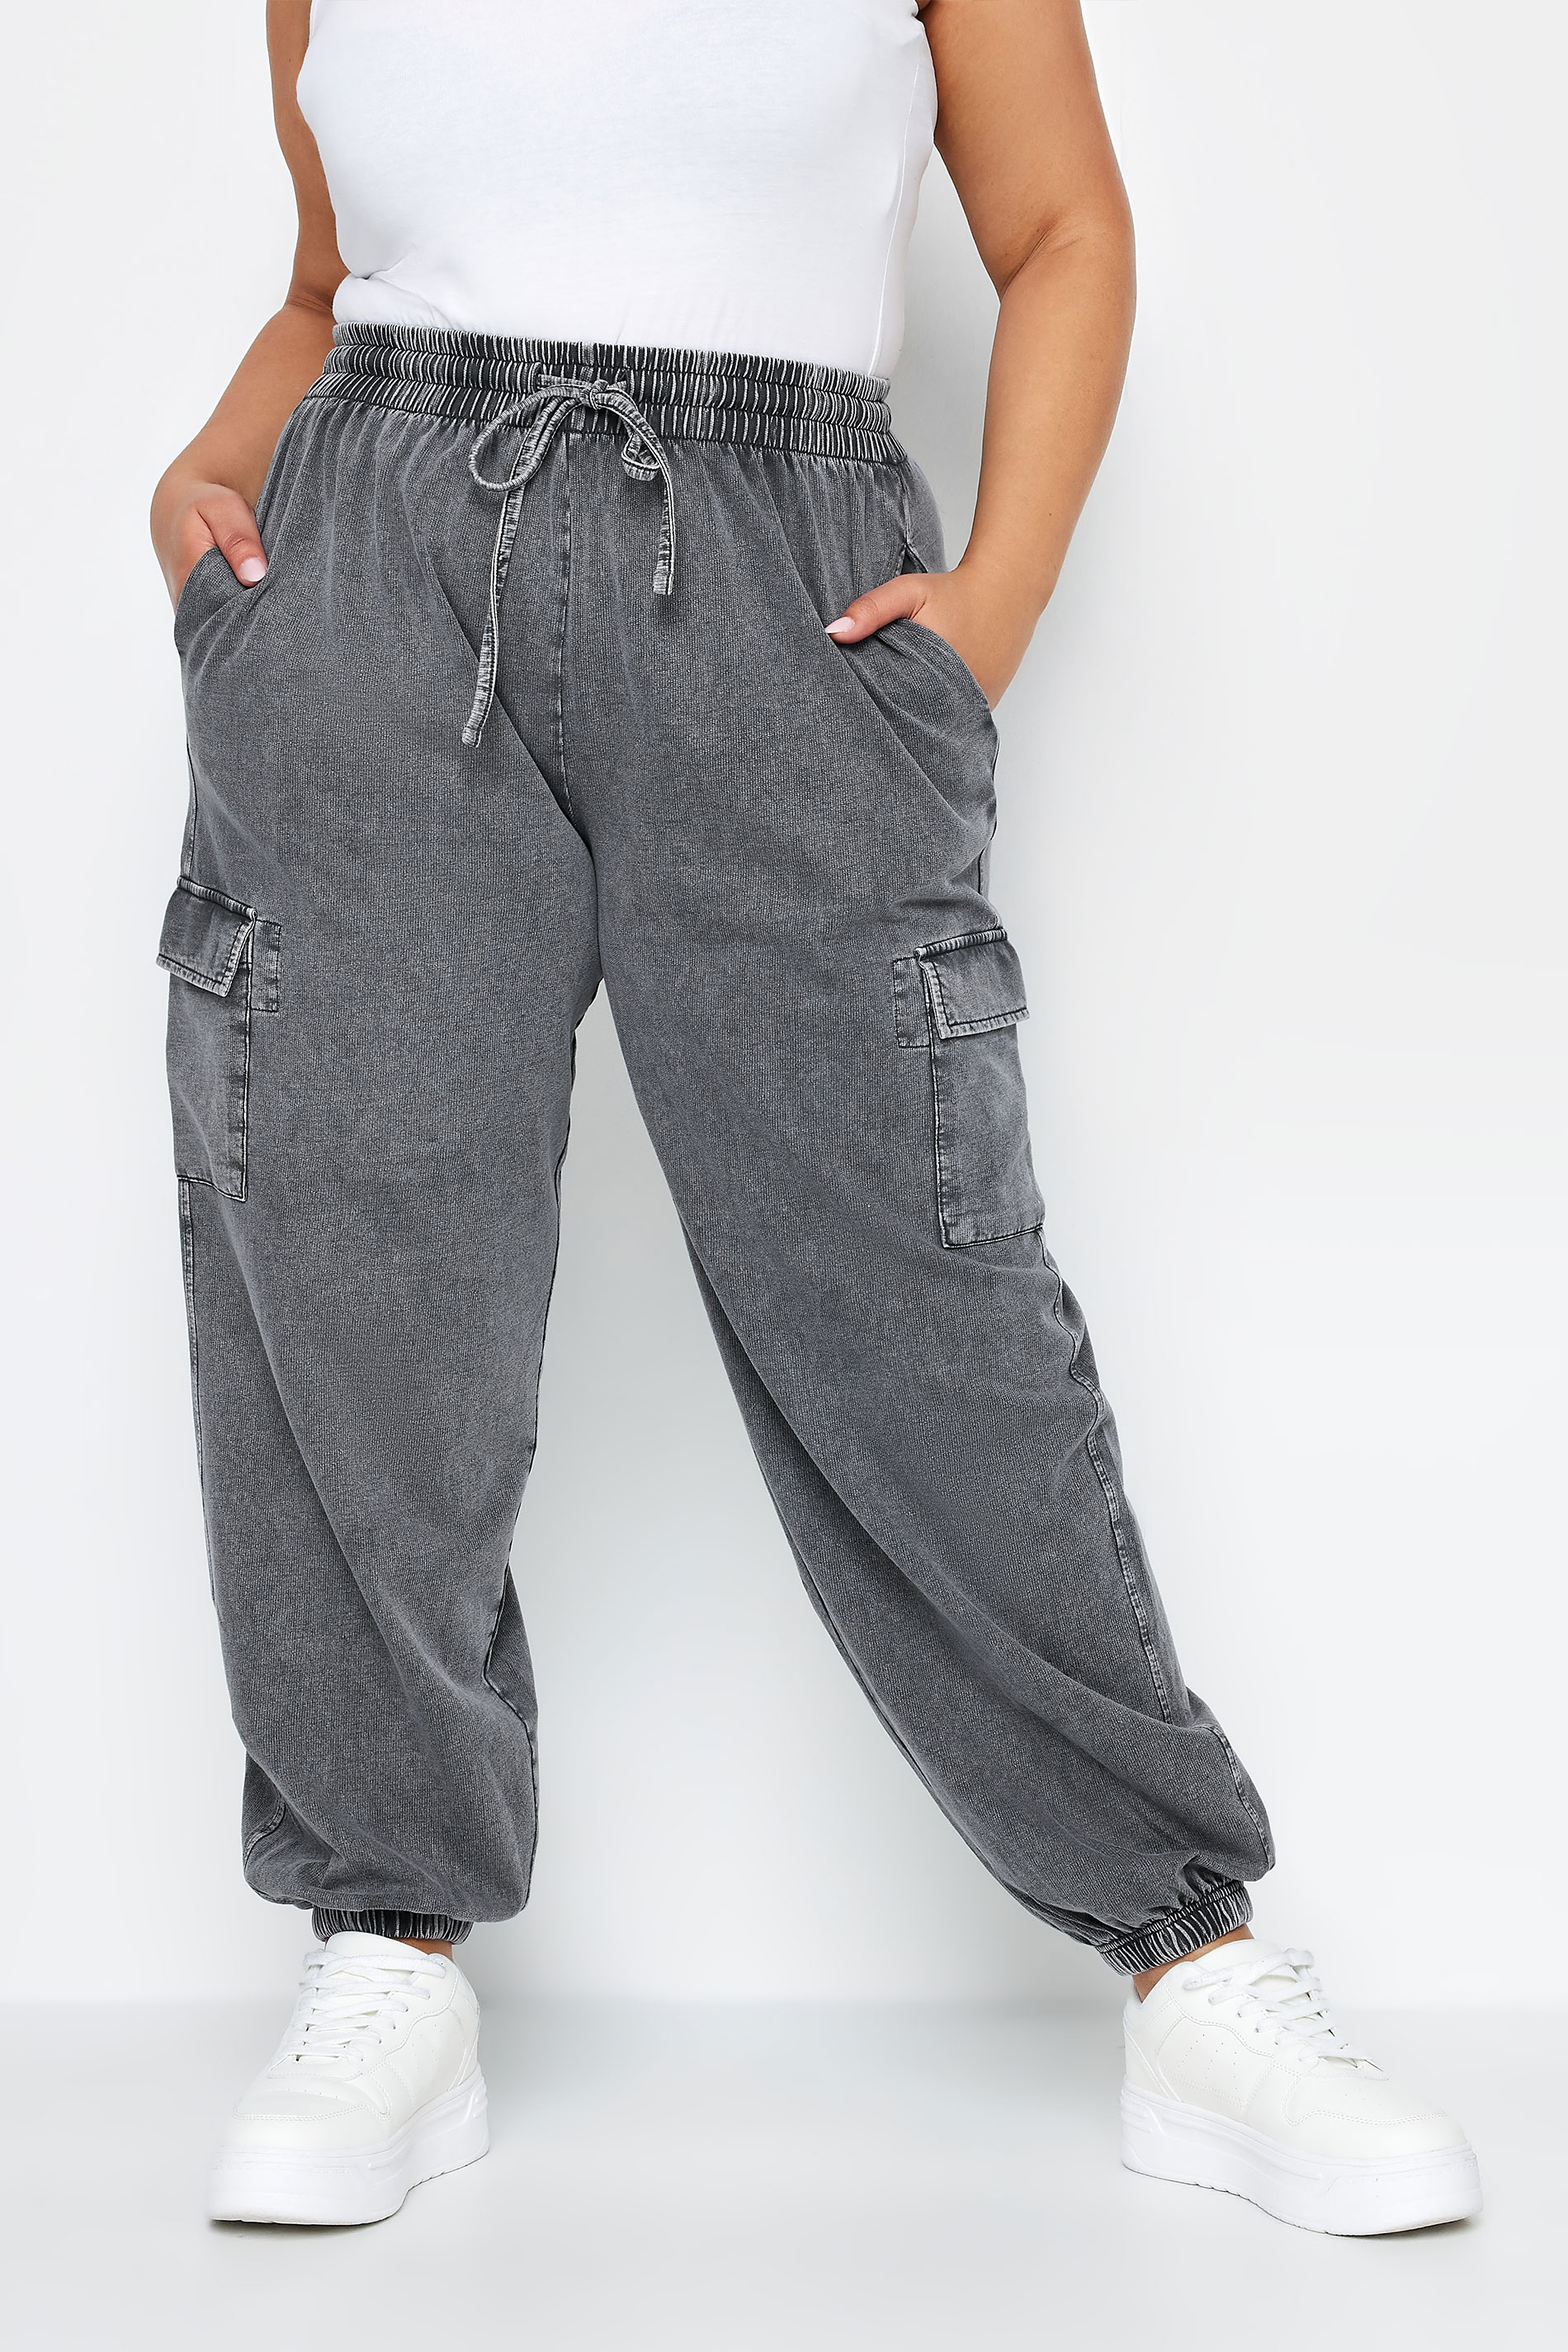 LIMITED COLLECTION Plus Size Grey Acid Wash Cuffed Cargo Joggers | Yours Clothing 1